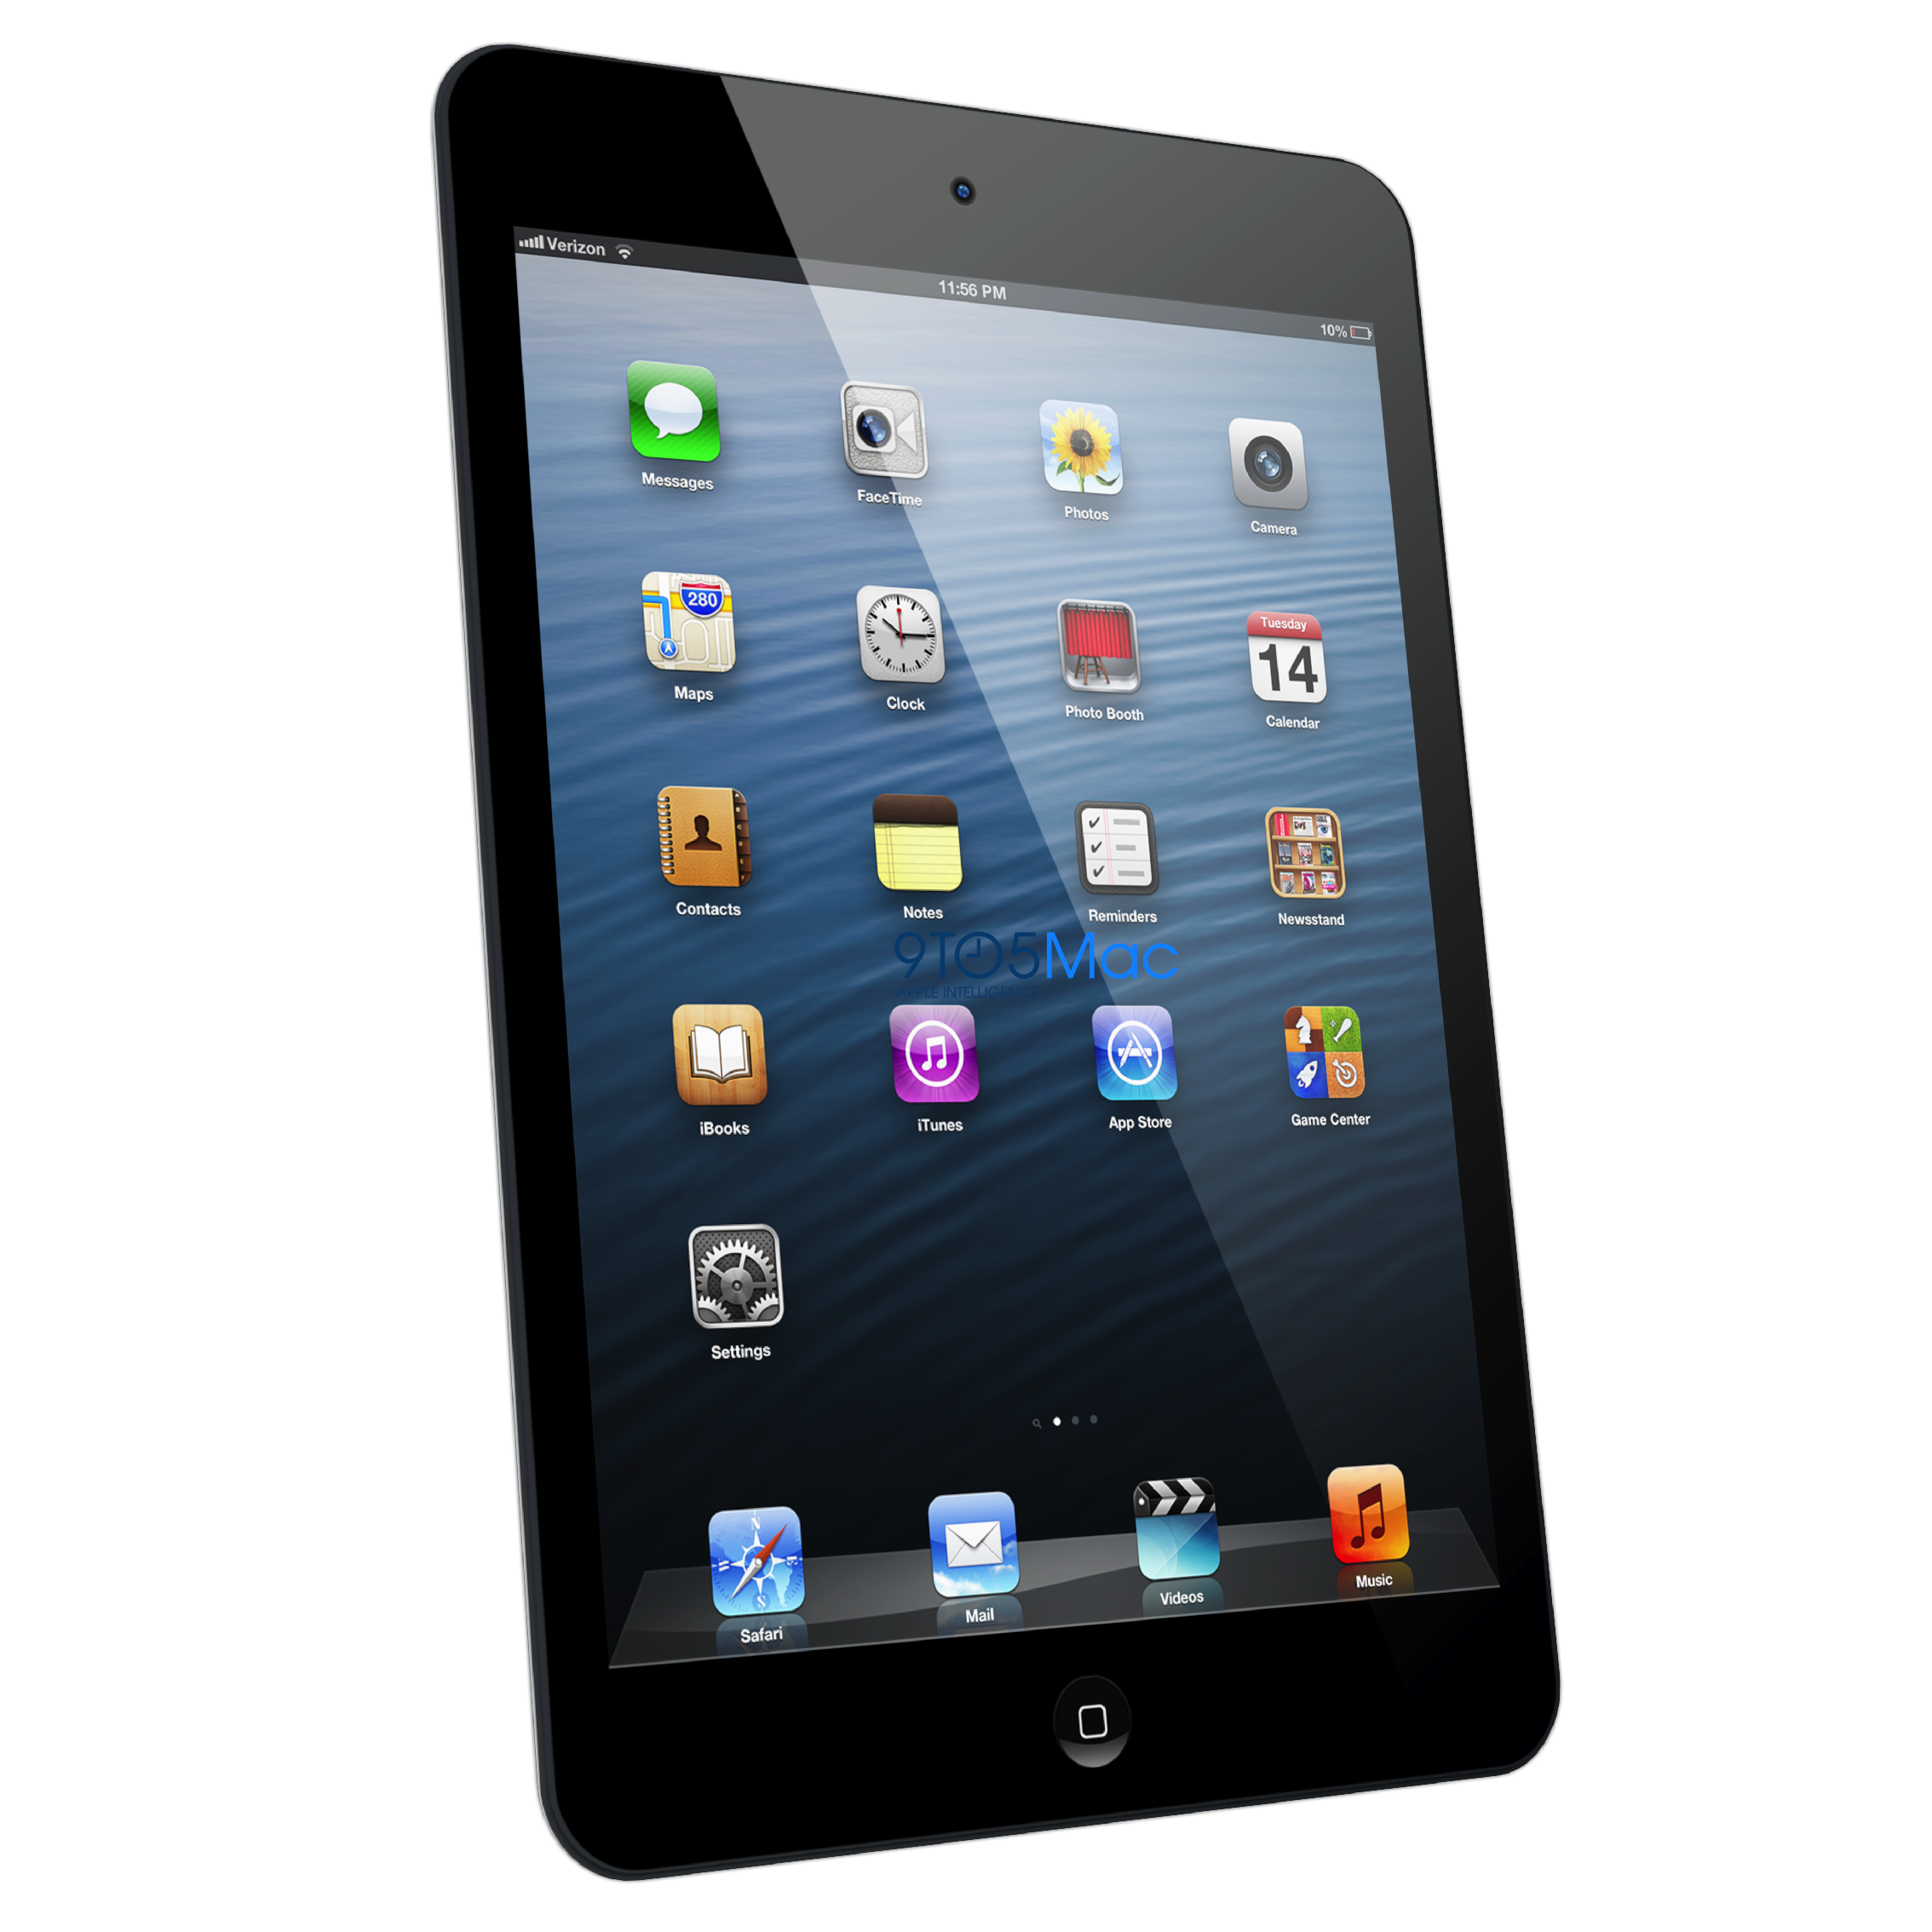 Apple's smaller iPad to likely start at a minimum of $329 in the U.S